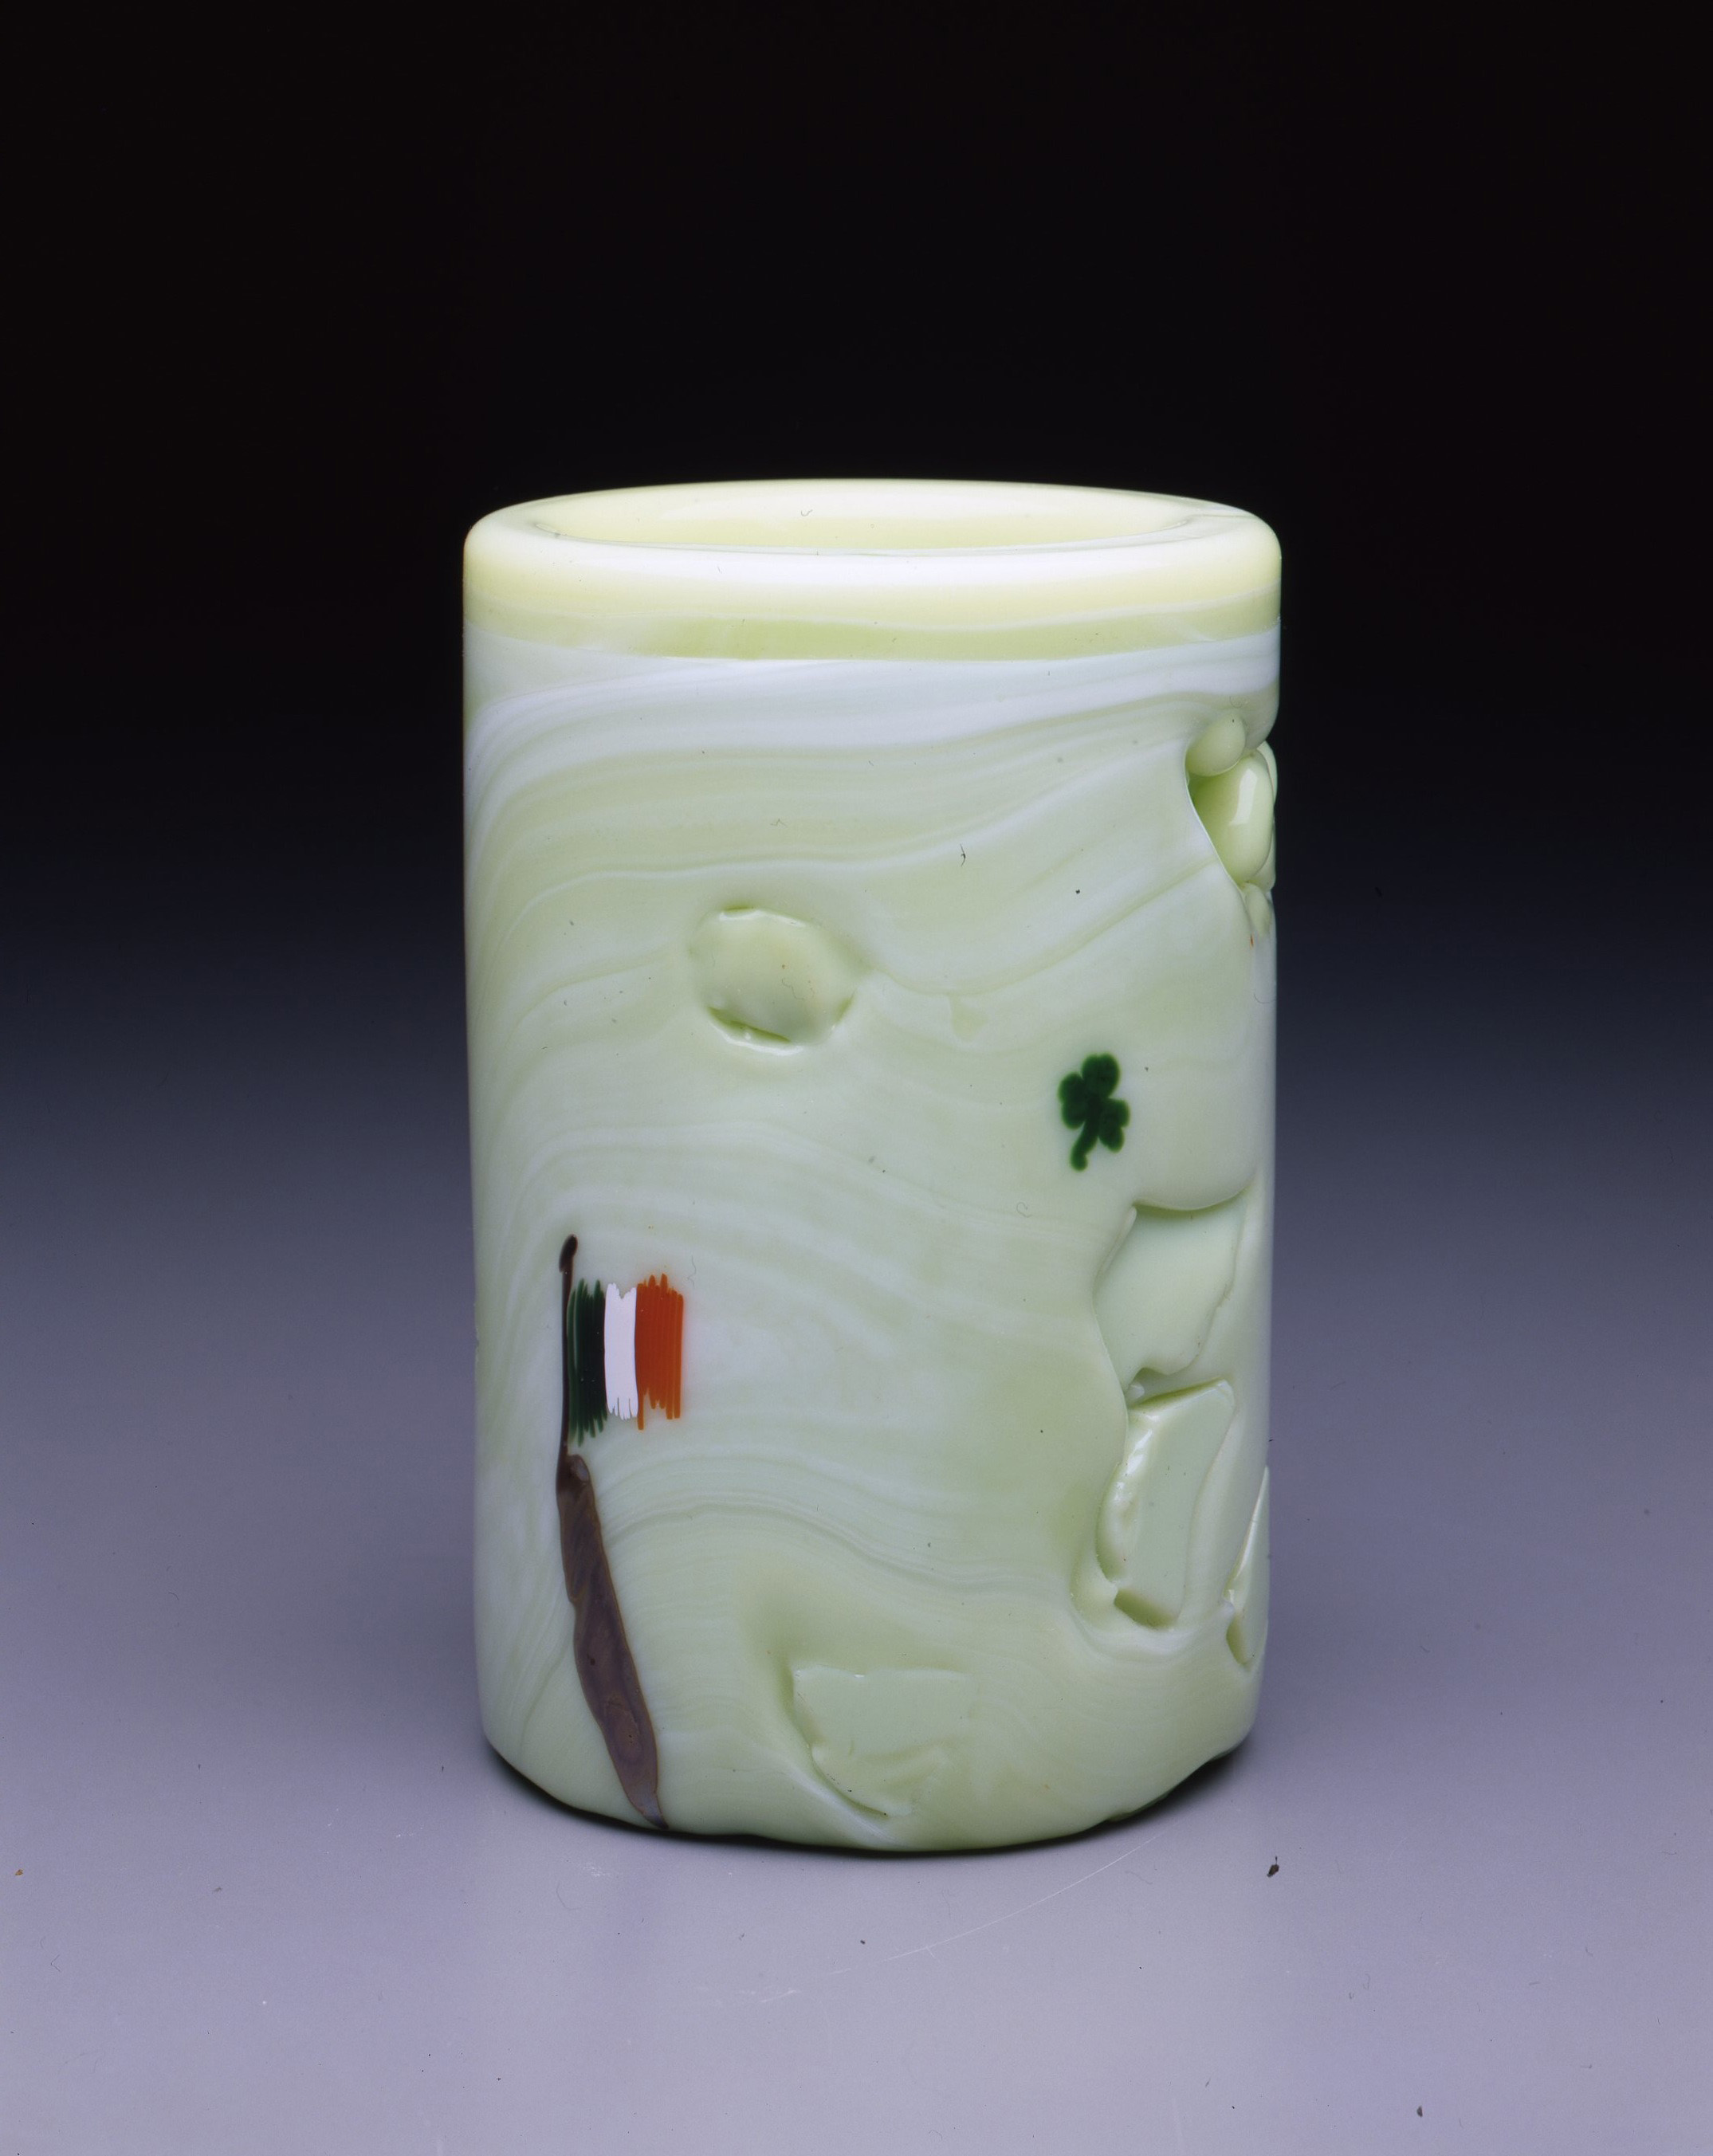  Dale Chihuly,  Irish Cylinder #6  &nbsp;(1975, glass, 6 1/2 x 4 inches), DC.268 